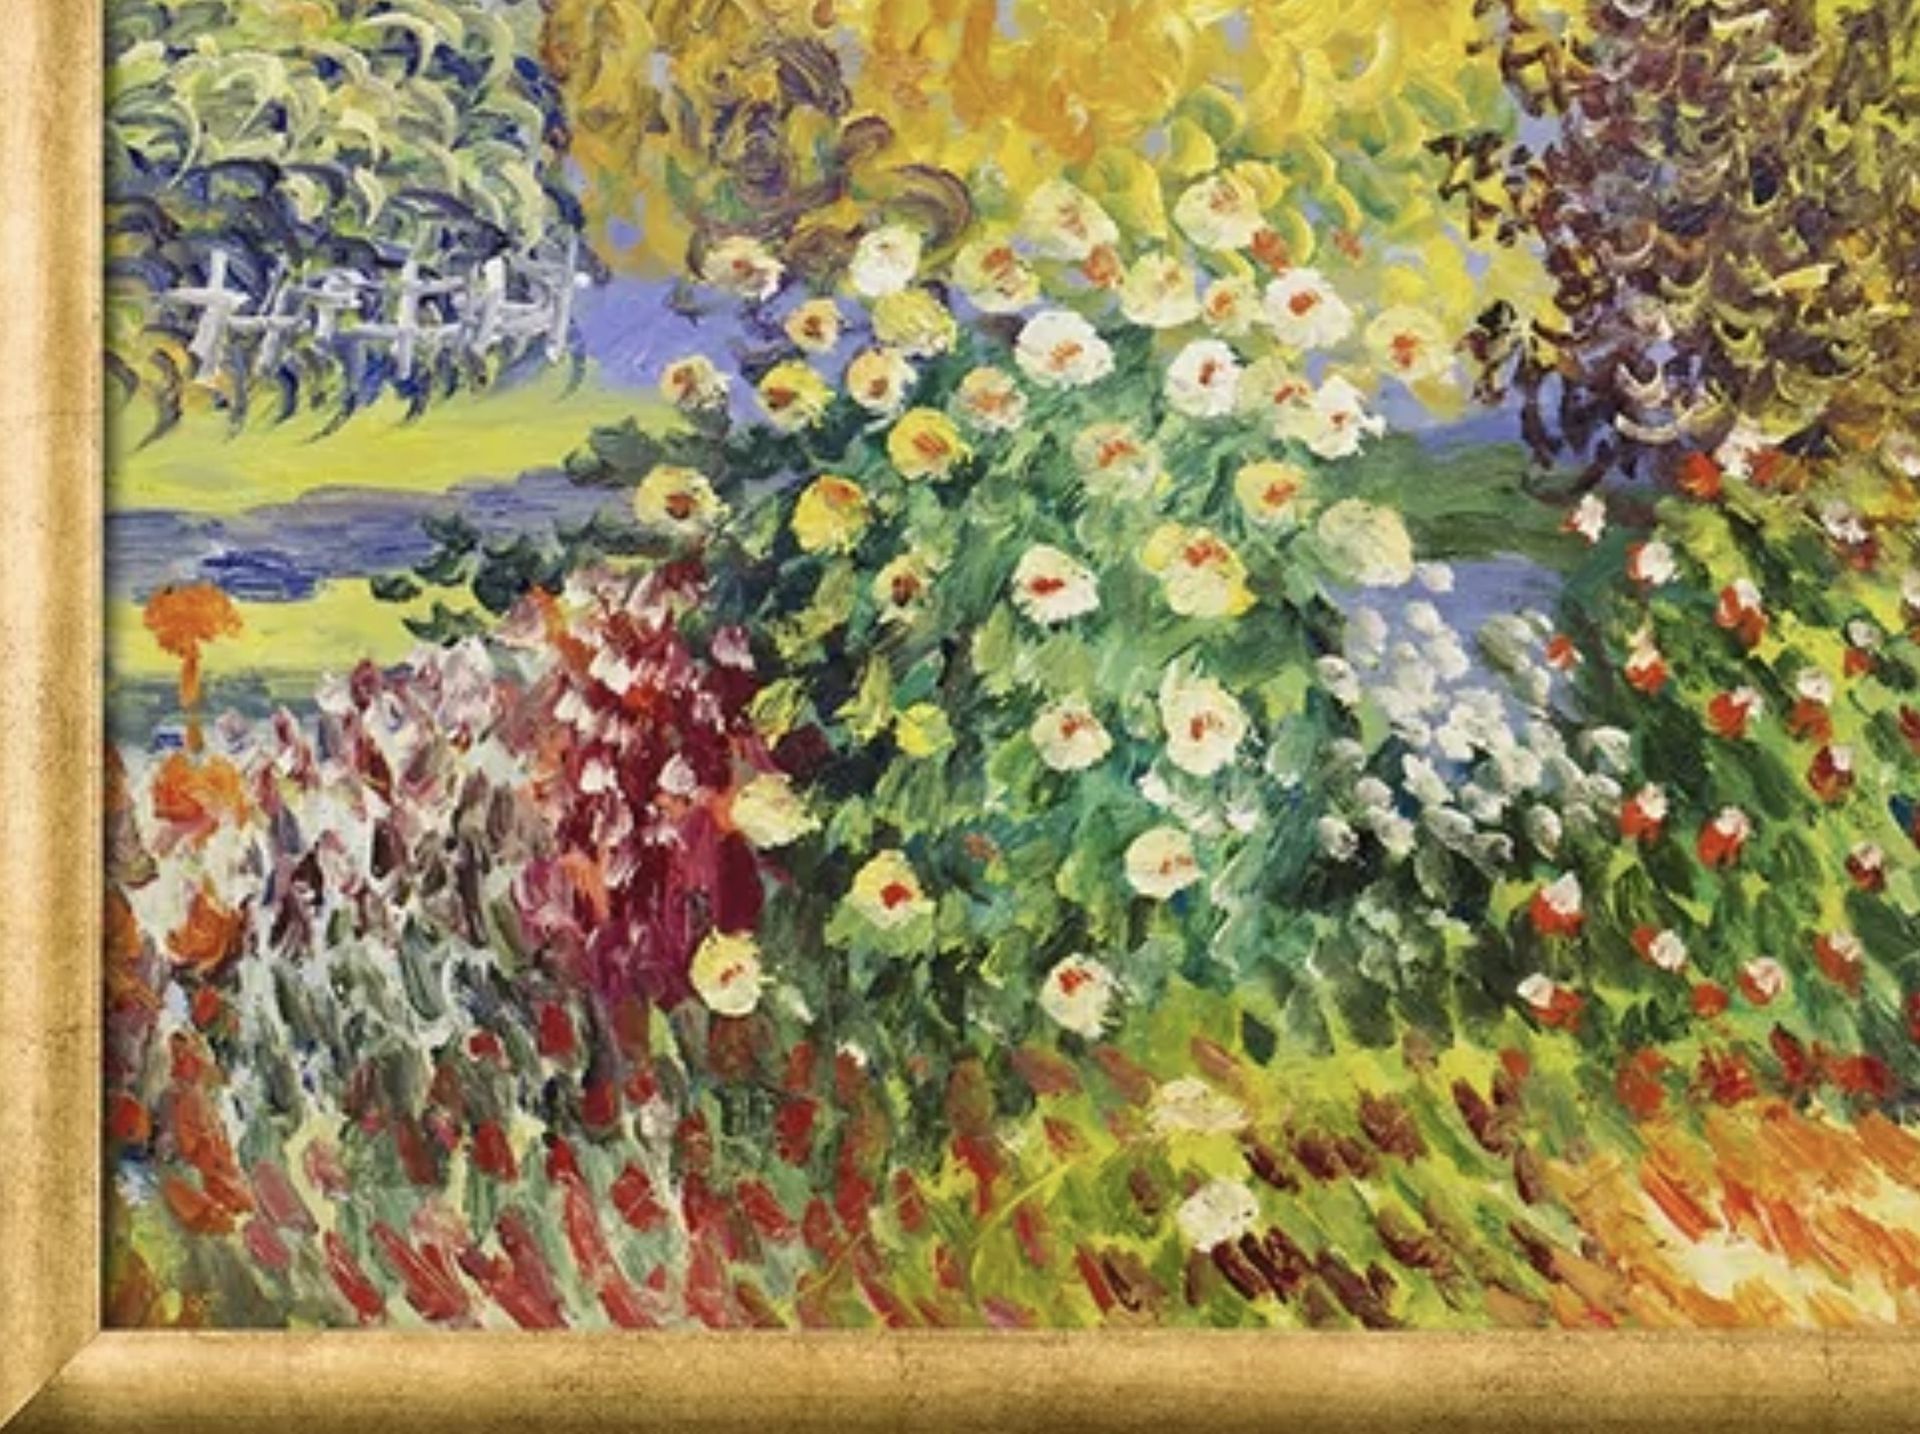 Claude Monet "Corner of the Garden at Montgeron" Oil Painting, After - Image 4 of 5